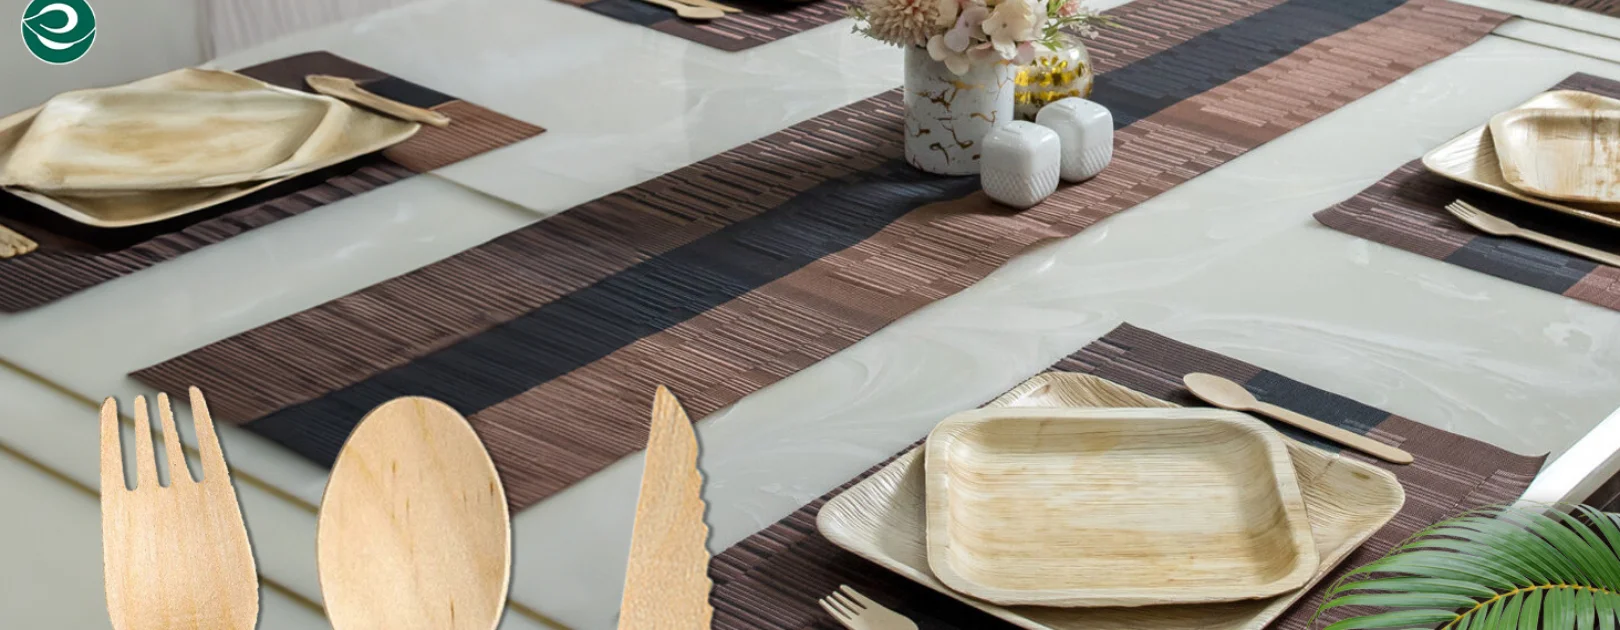 wooden cutlery slider and lifestyle 1